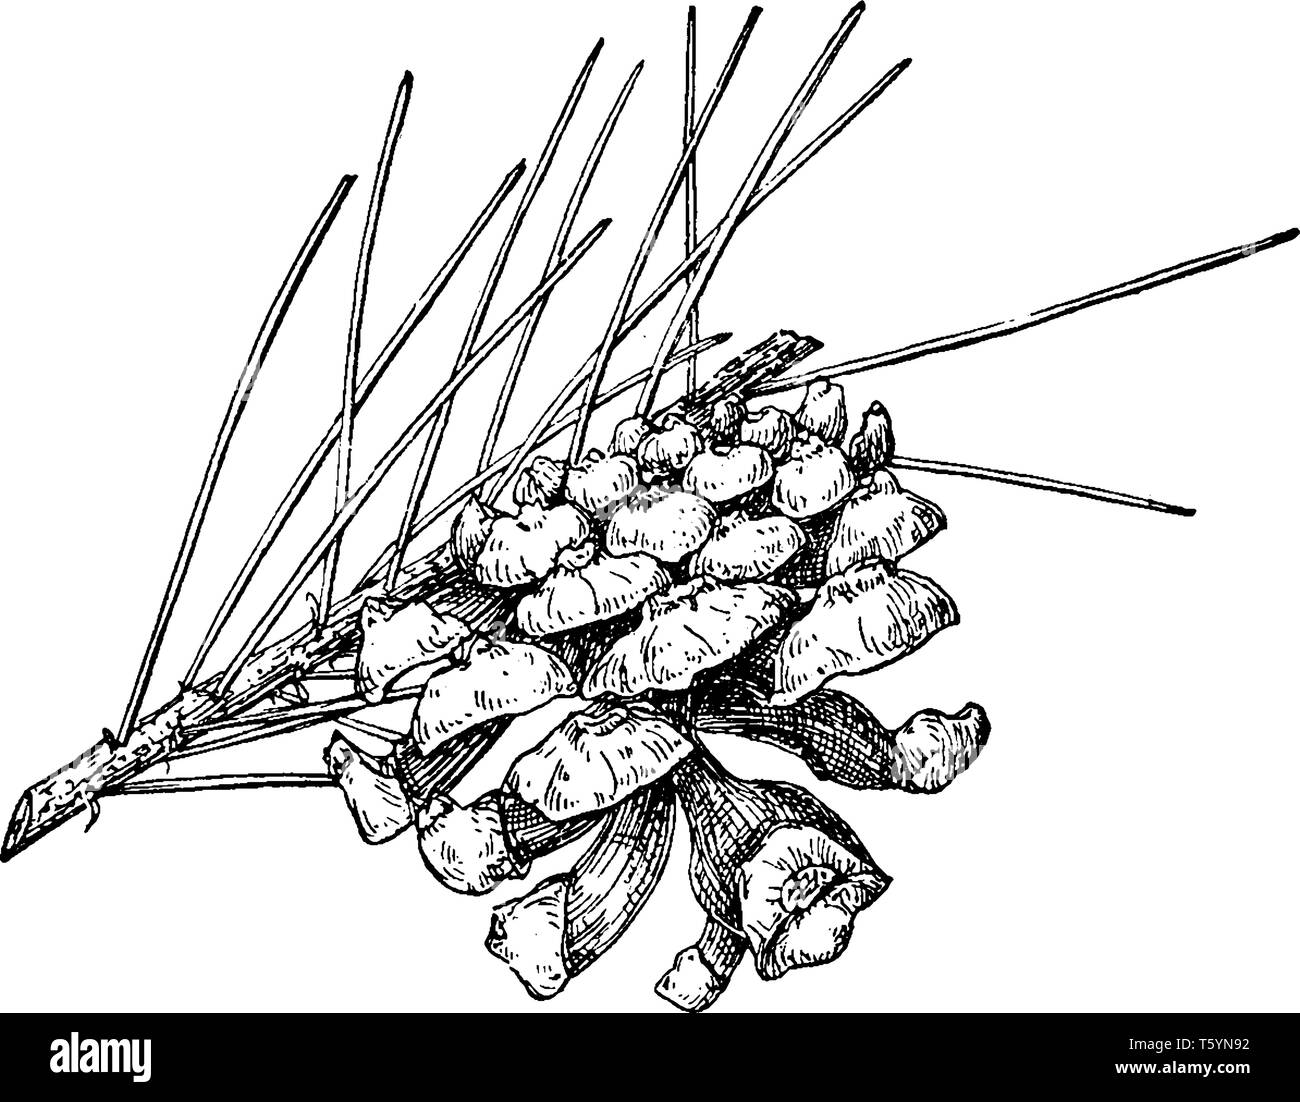 A picture showing the Pine Cone of Single-Leaf Pinyon which is also known as Pinus monophylla, vintage line drawing or engraving illustration. Stock Vector